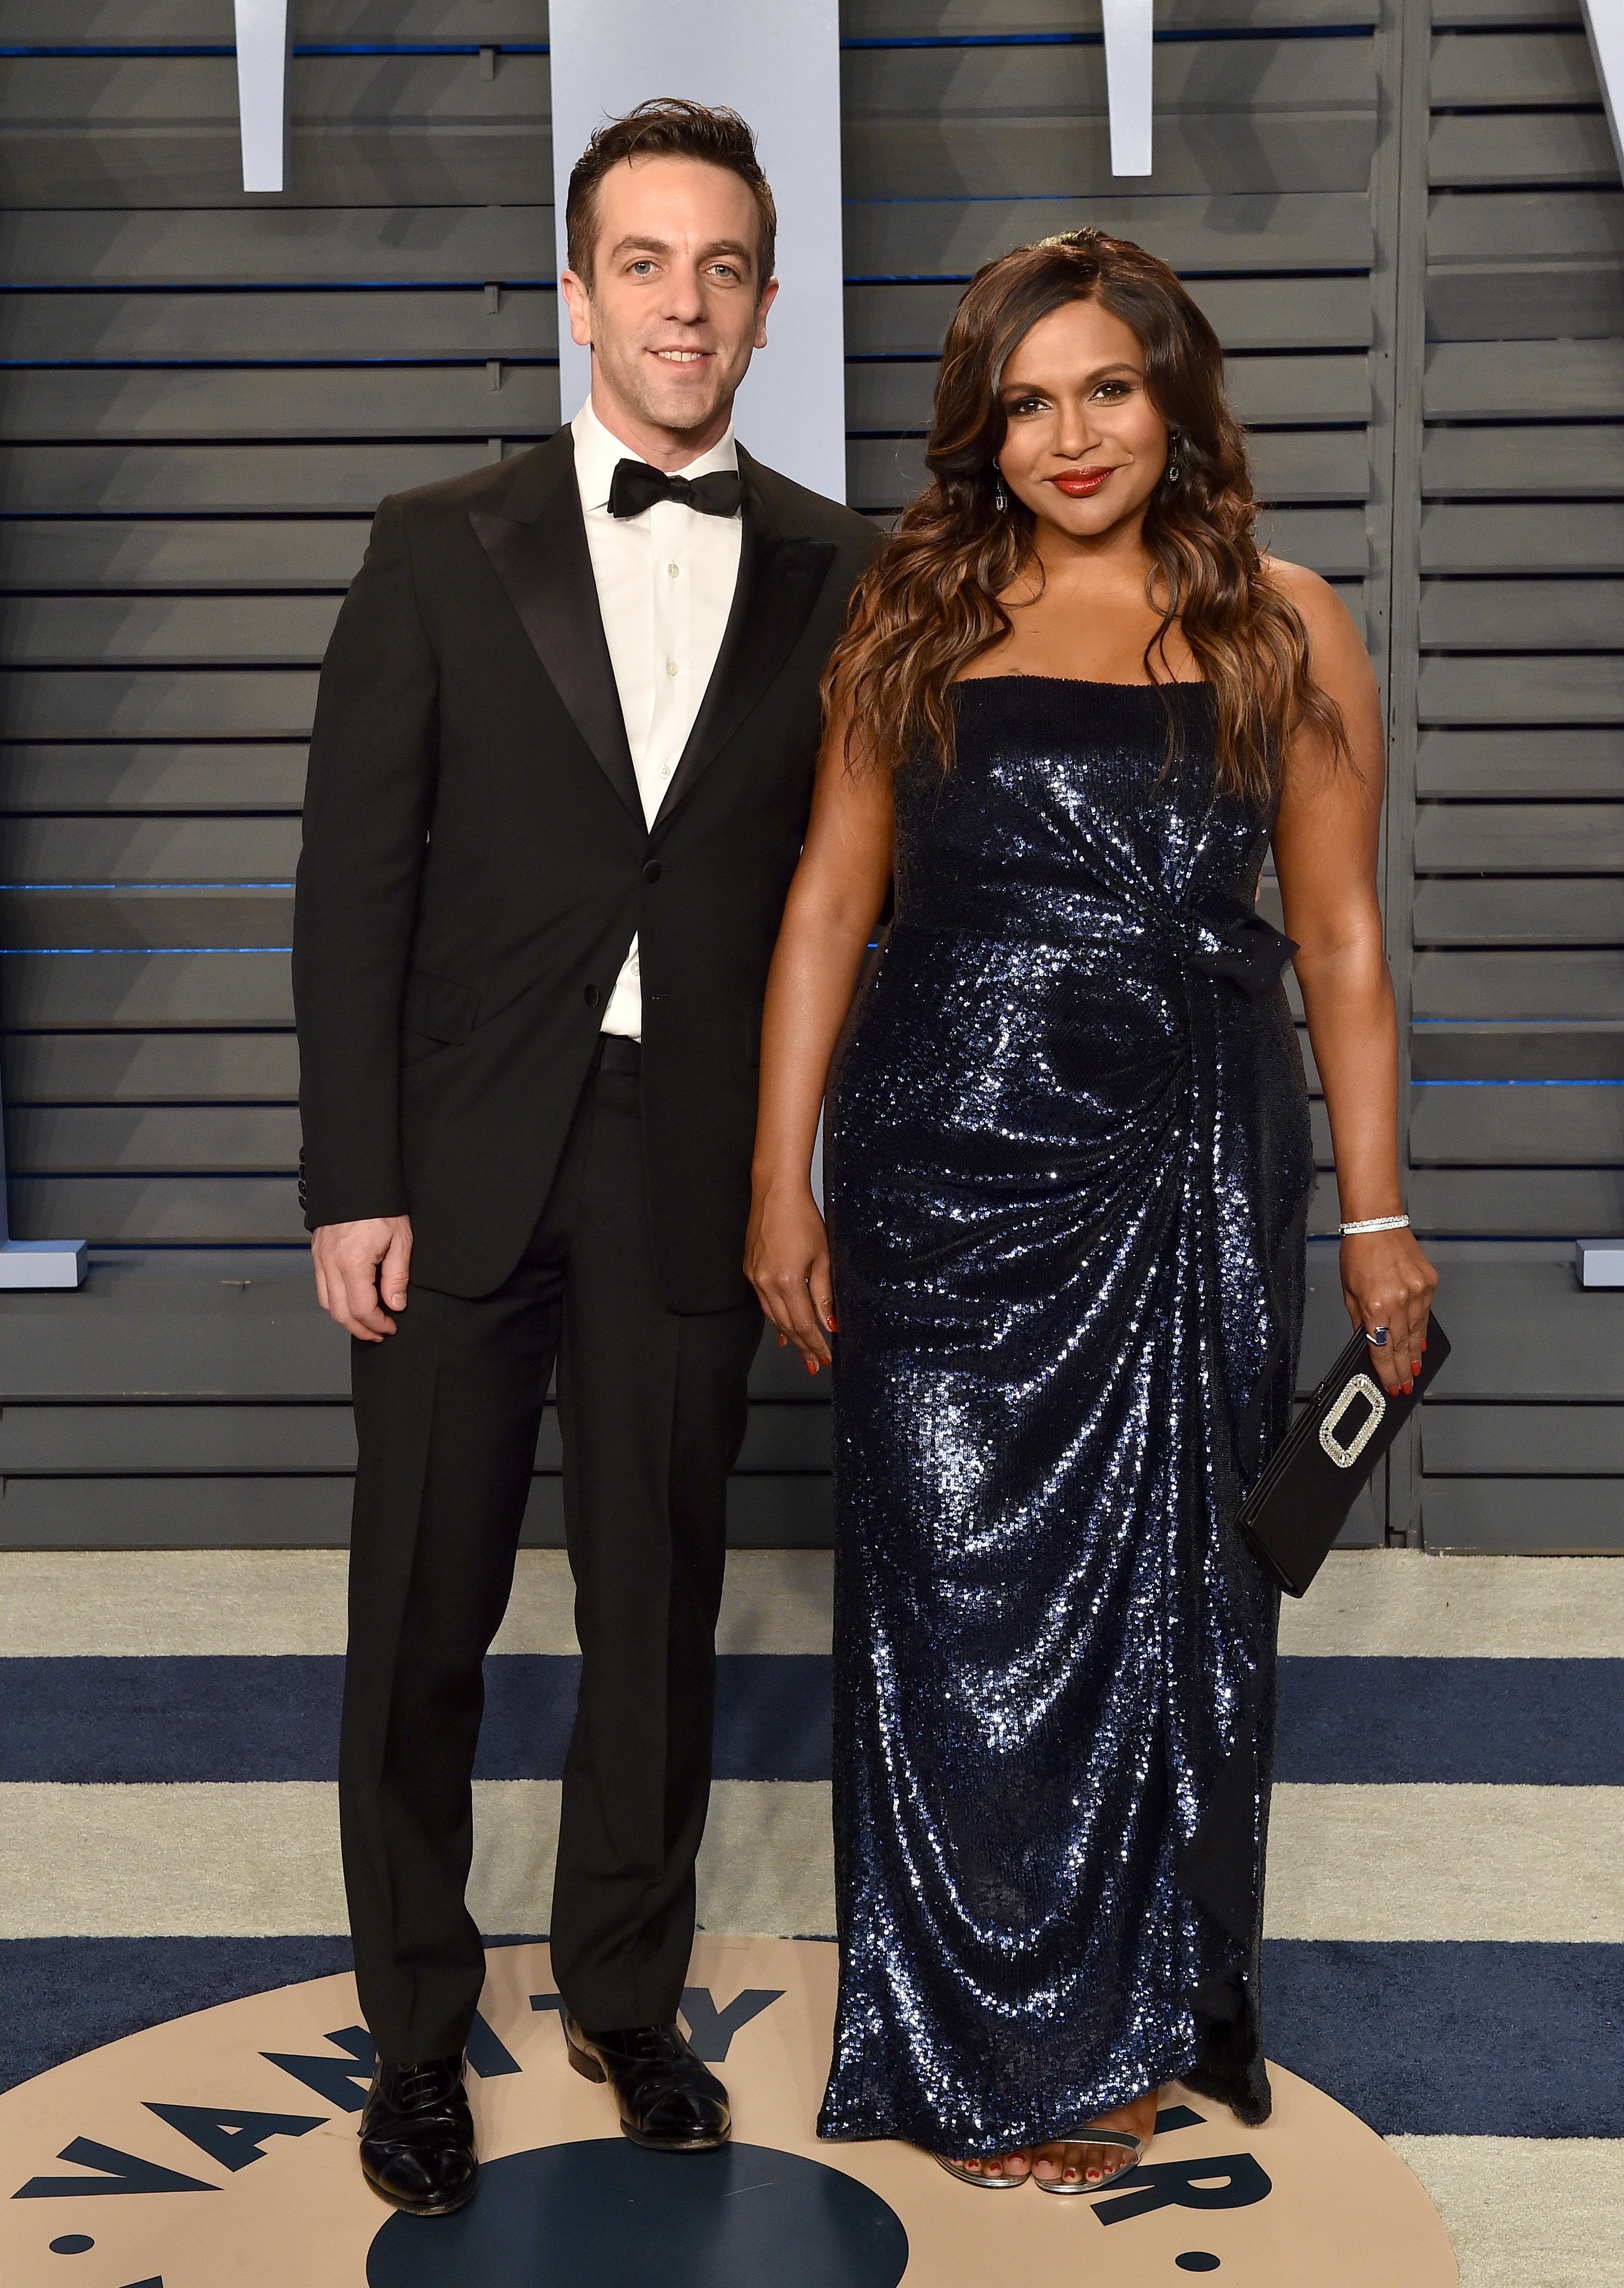 B.J. Novak and Mindy Kaling attend the 2018 Vanity Fair Oscar Party at Wallis Annenberg Center for the Performing Arts on March 4, 2018, in Beverly Hills, California. | Source: Getty Images